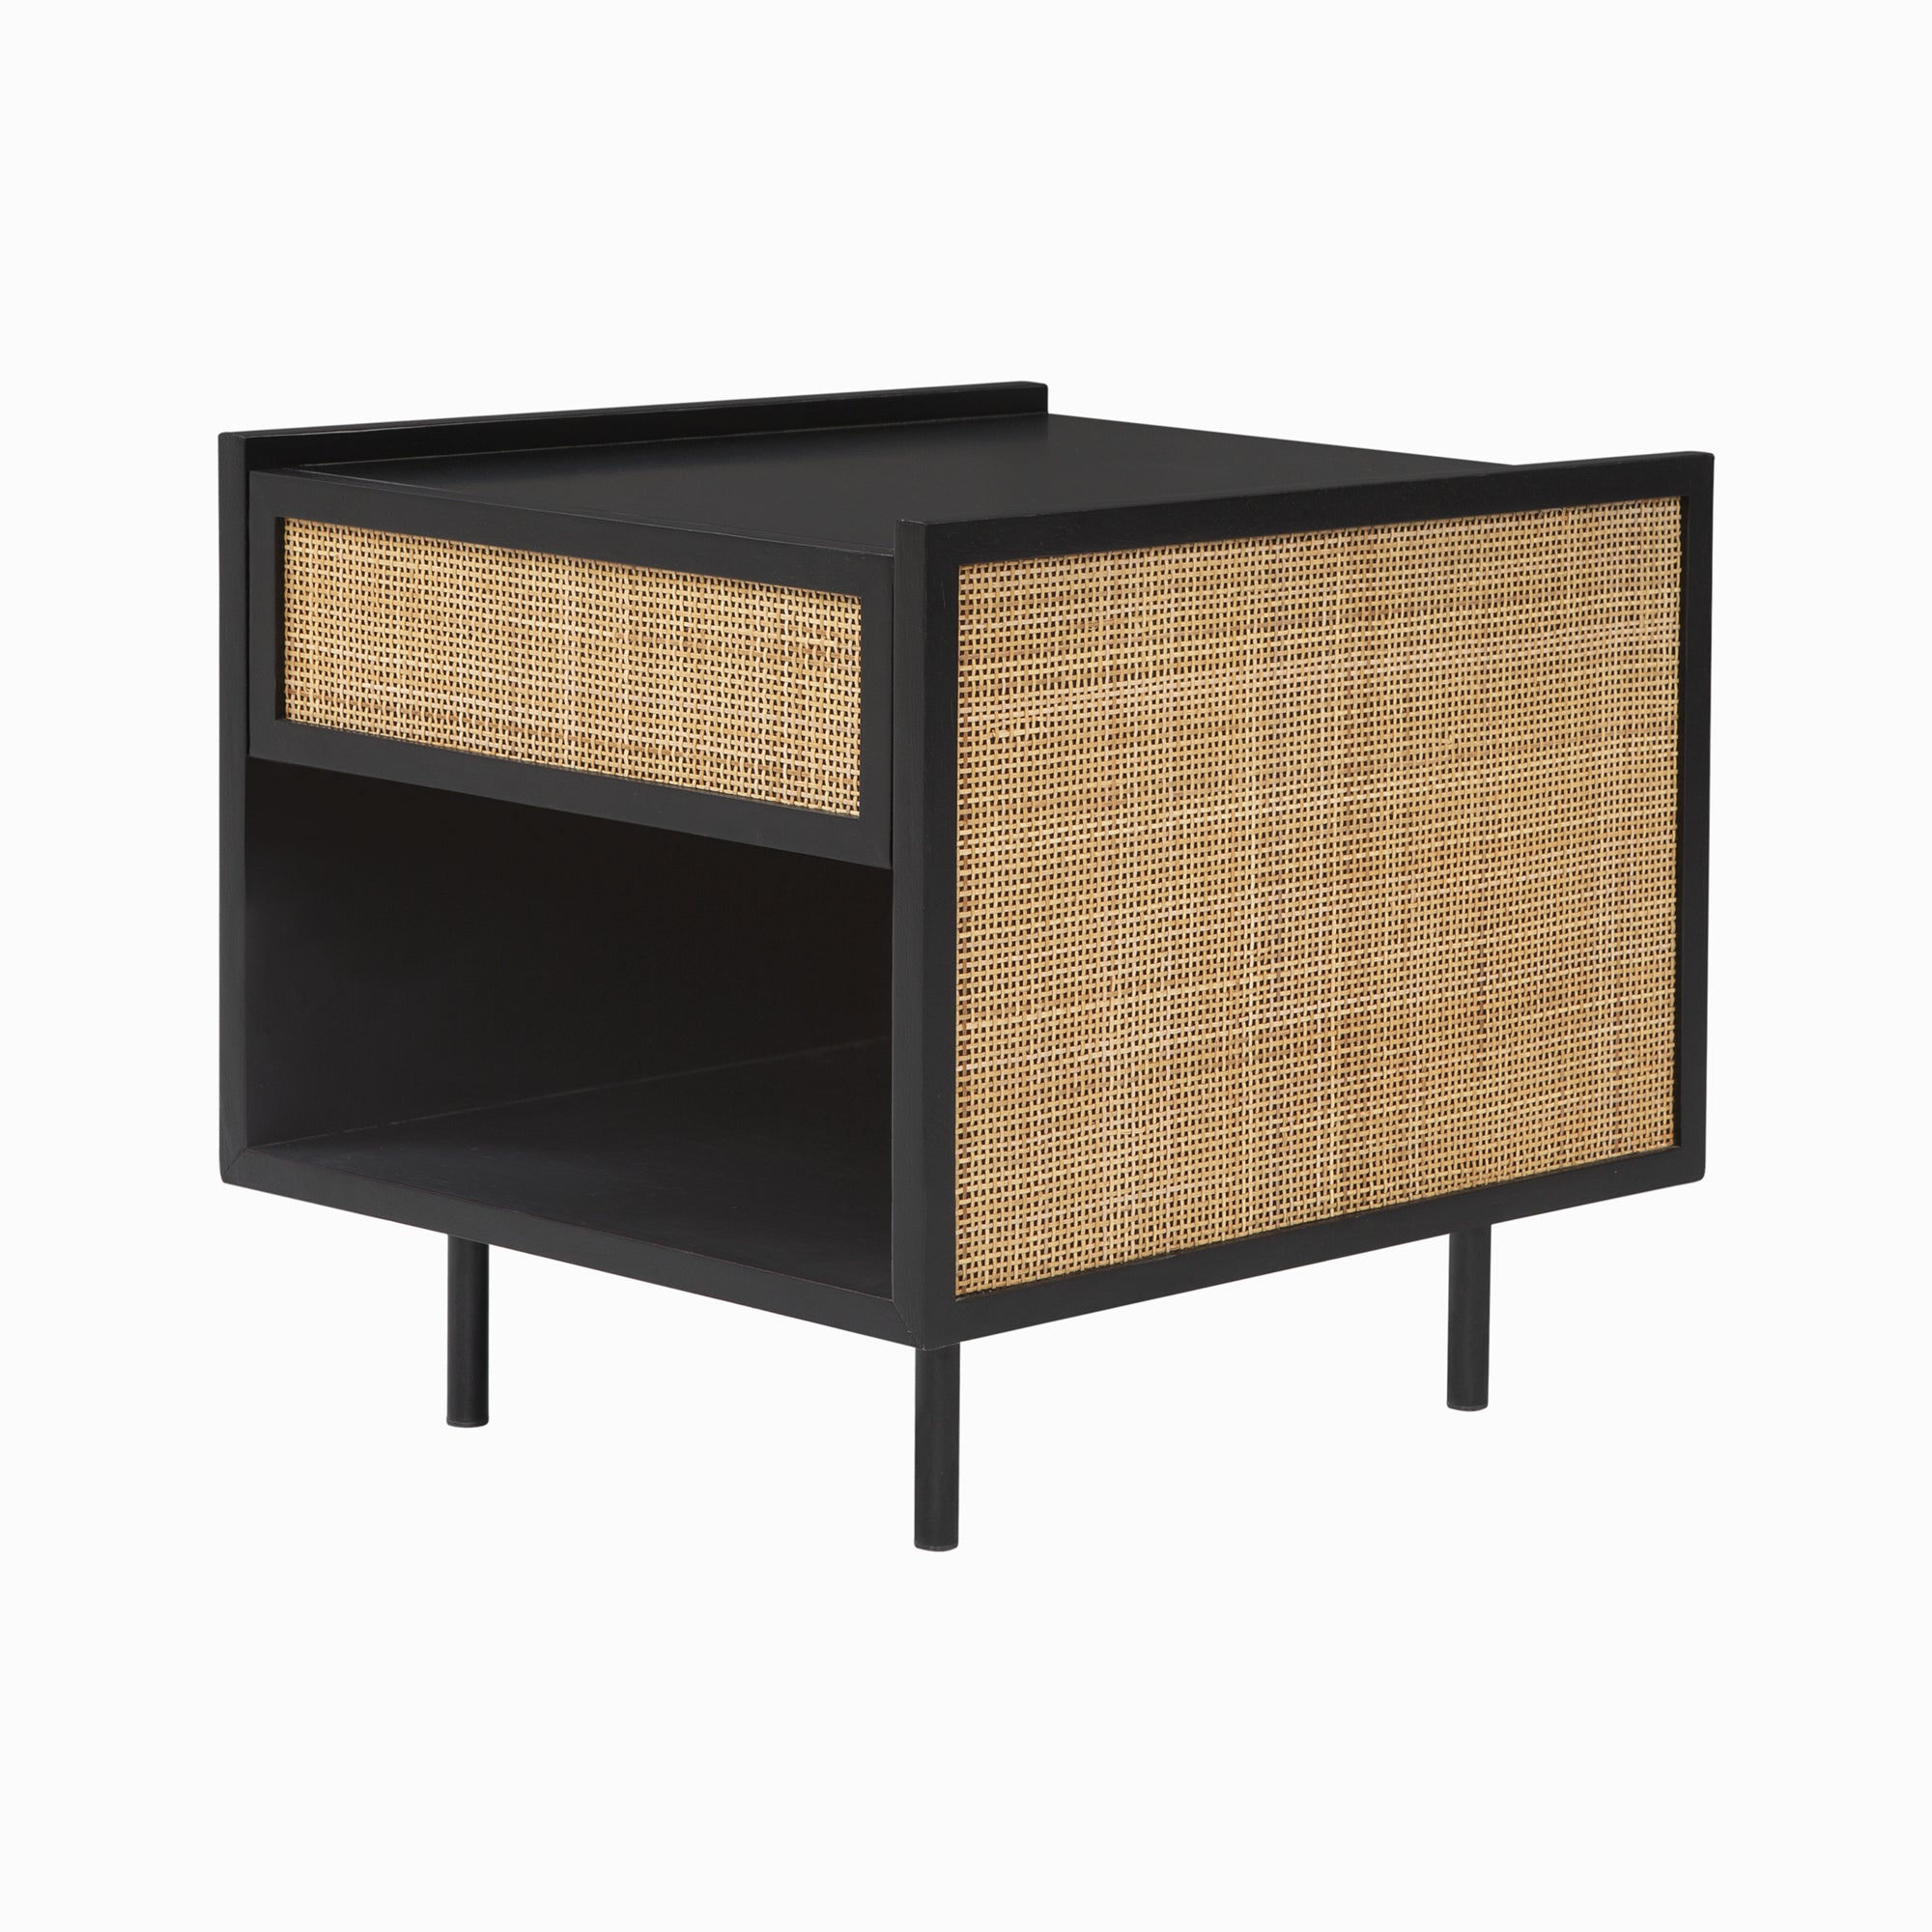 Cape Nightstand - Black with rattan